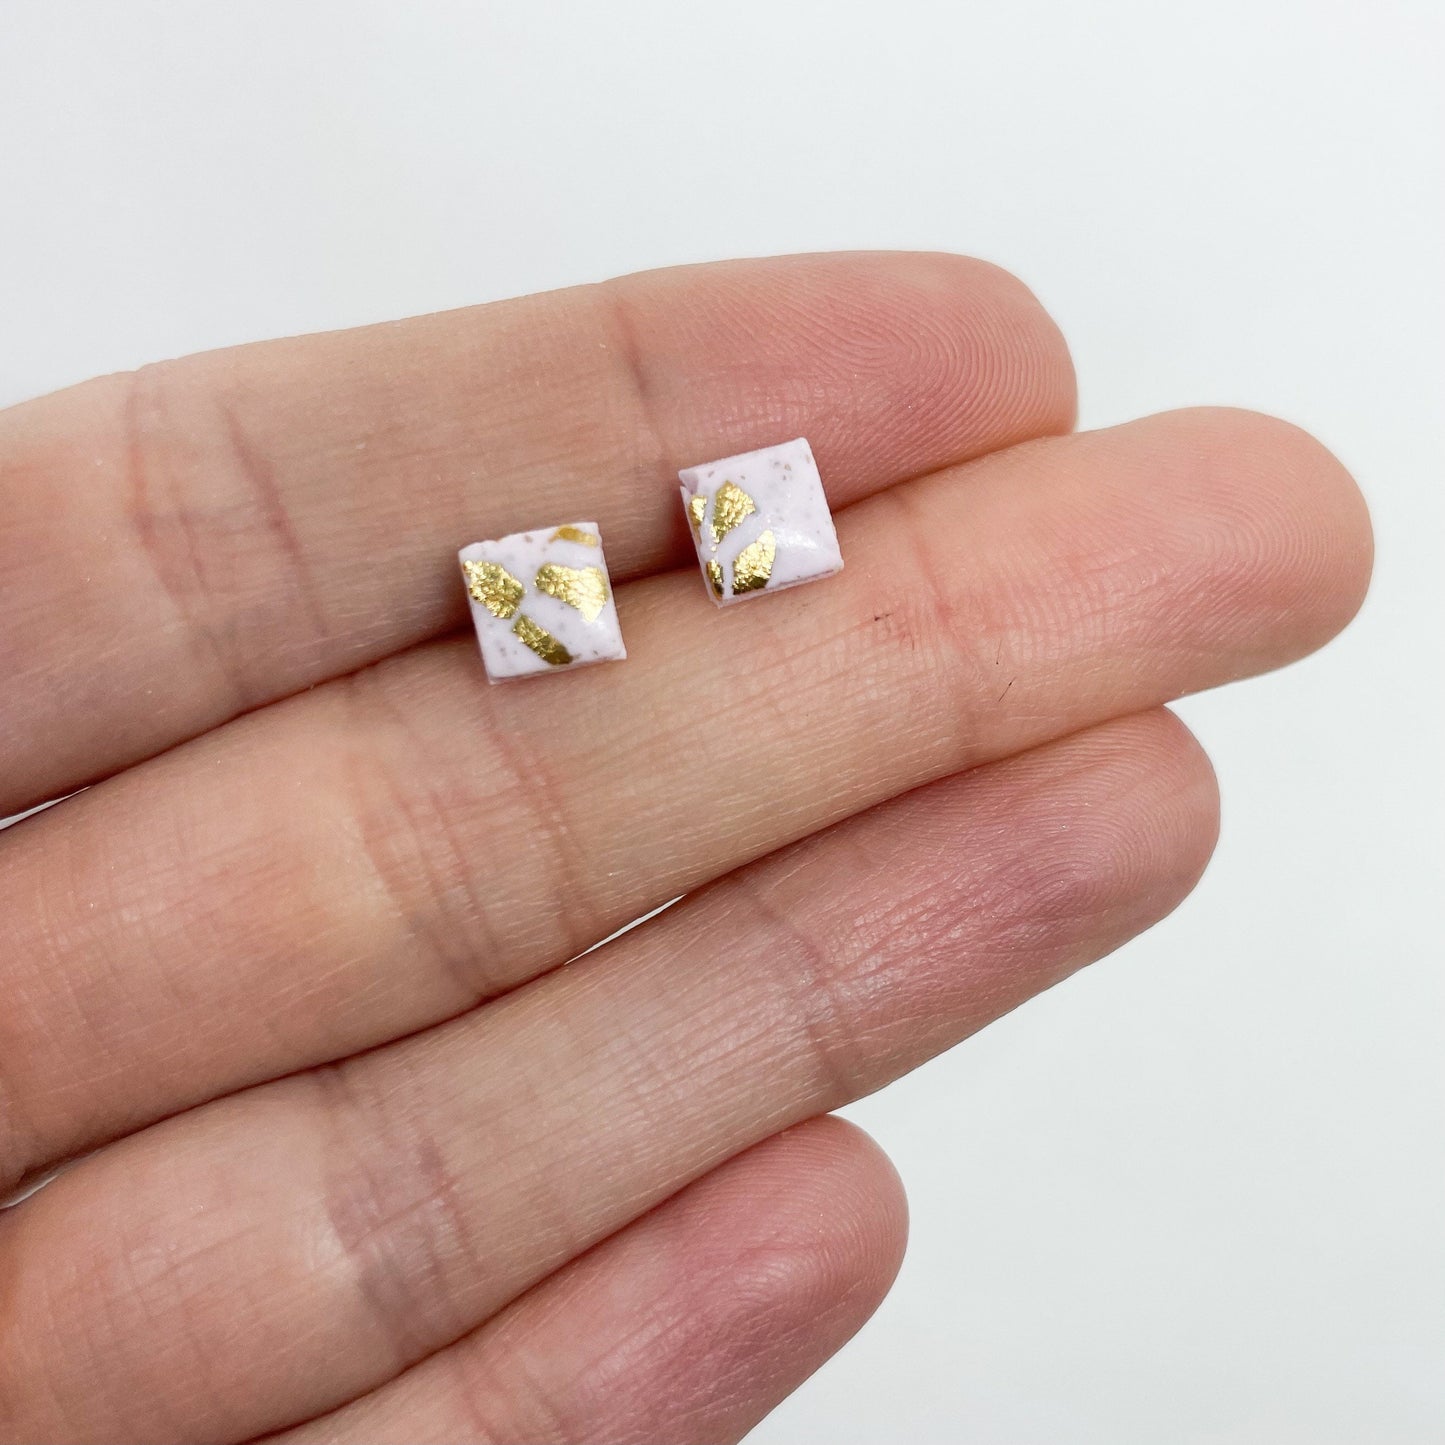 Tiny polymer clay stud earrings, pink and gold leaf, best friend birthday gift, galentine’s gift, Valentine’s gift